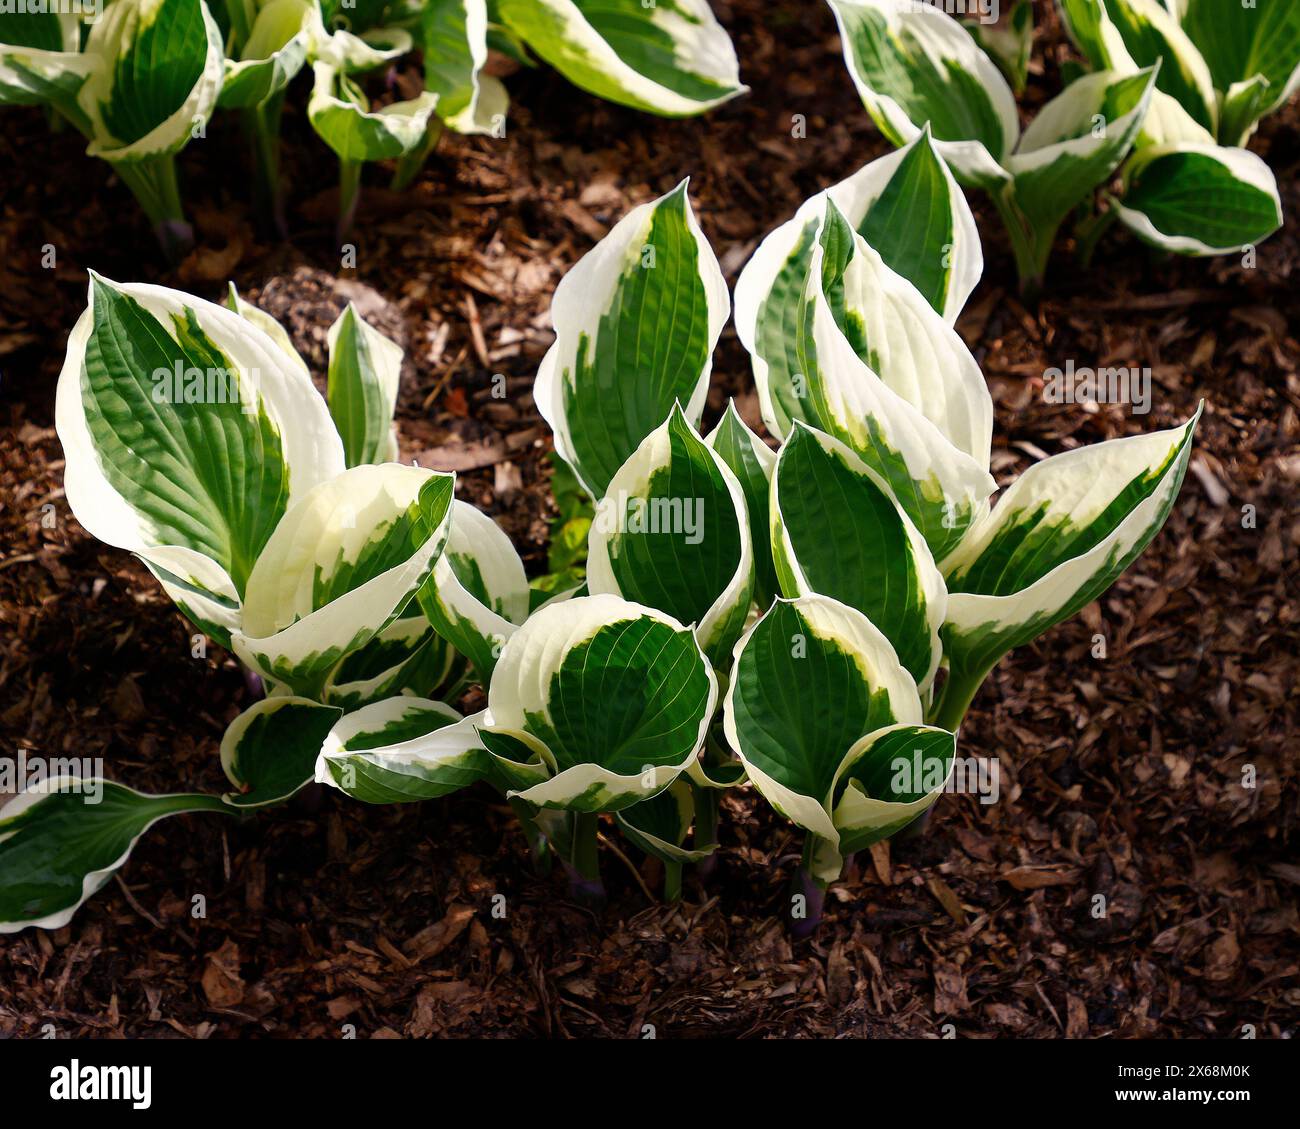 Closeup of the green and white edged variegated leaves of the herbaceous perennial garden plantain lily plant Hosta Karin. Stock Photo